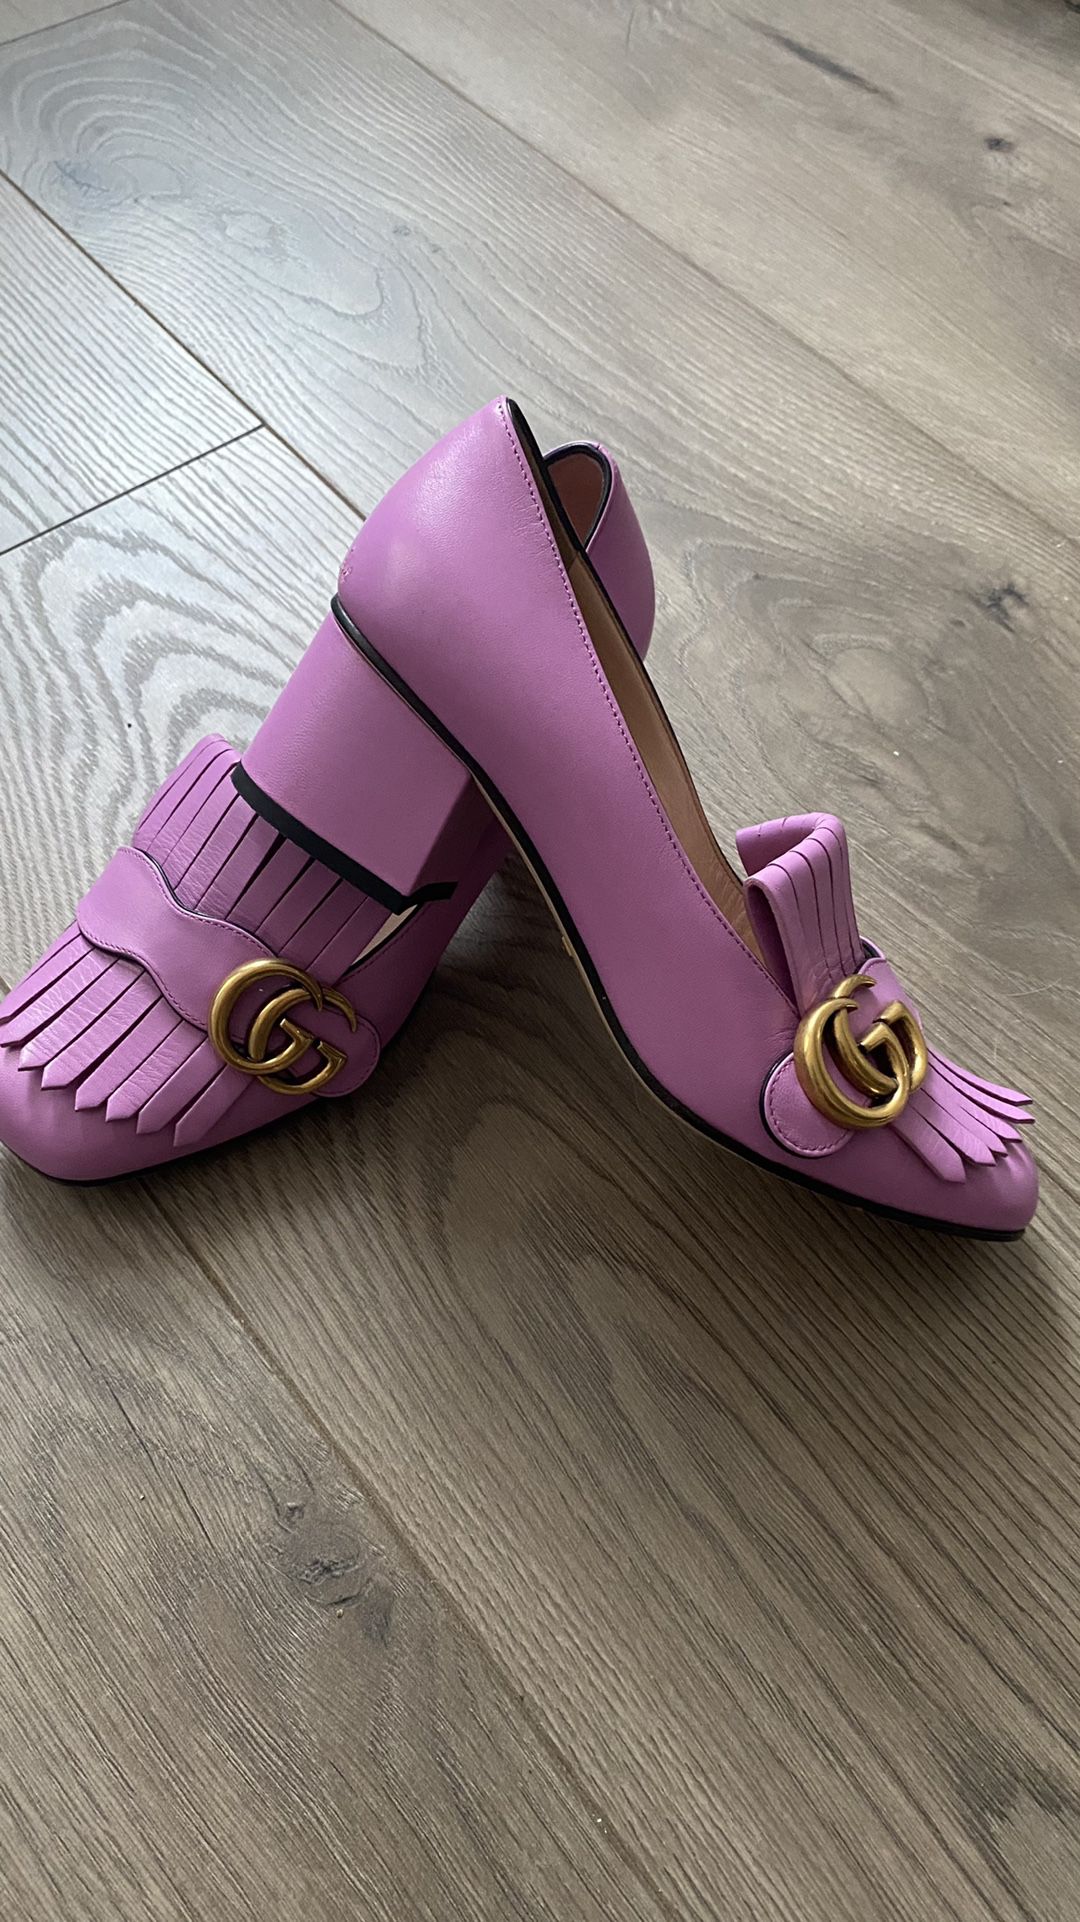 Gucci Leather Mid-Heel Pumps, Pink Leather 